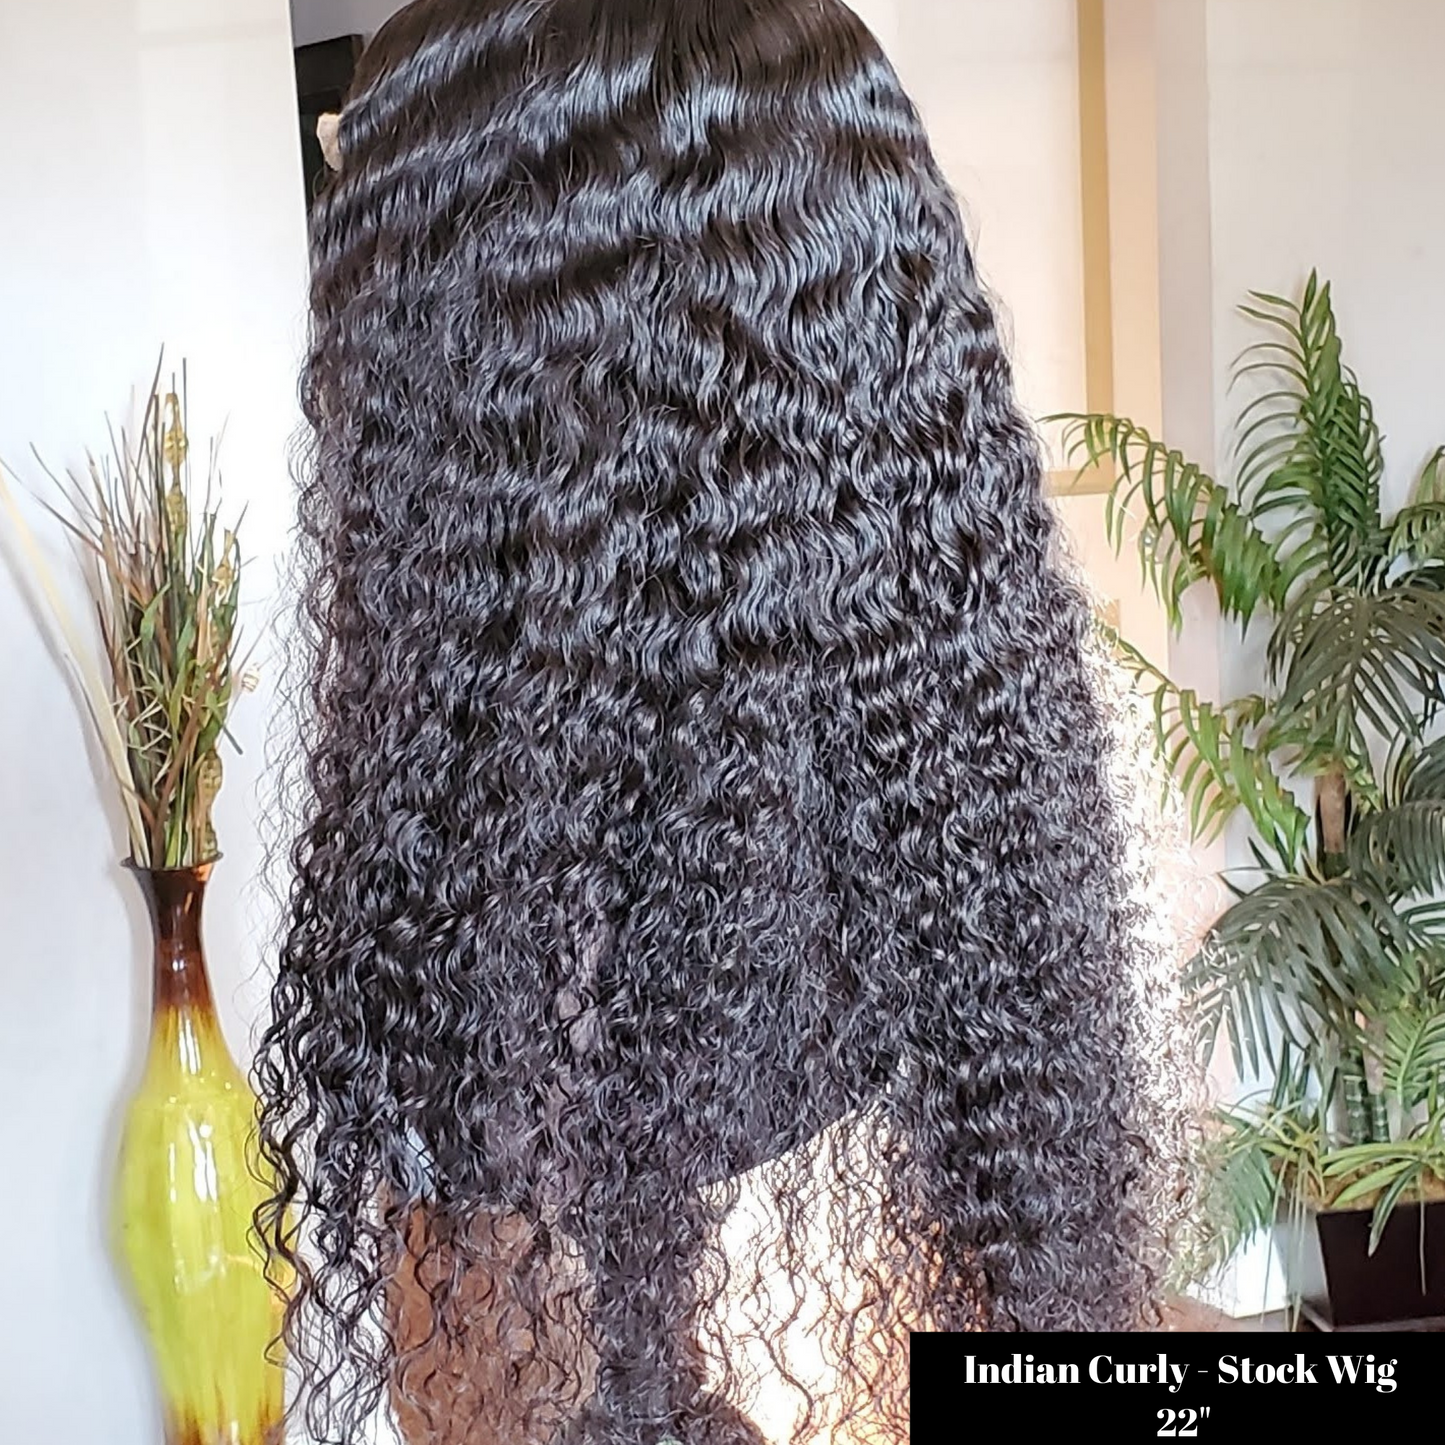 Indian Curly 13x6 Frontal Wig